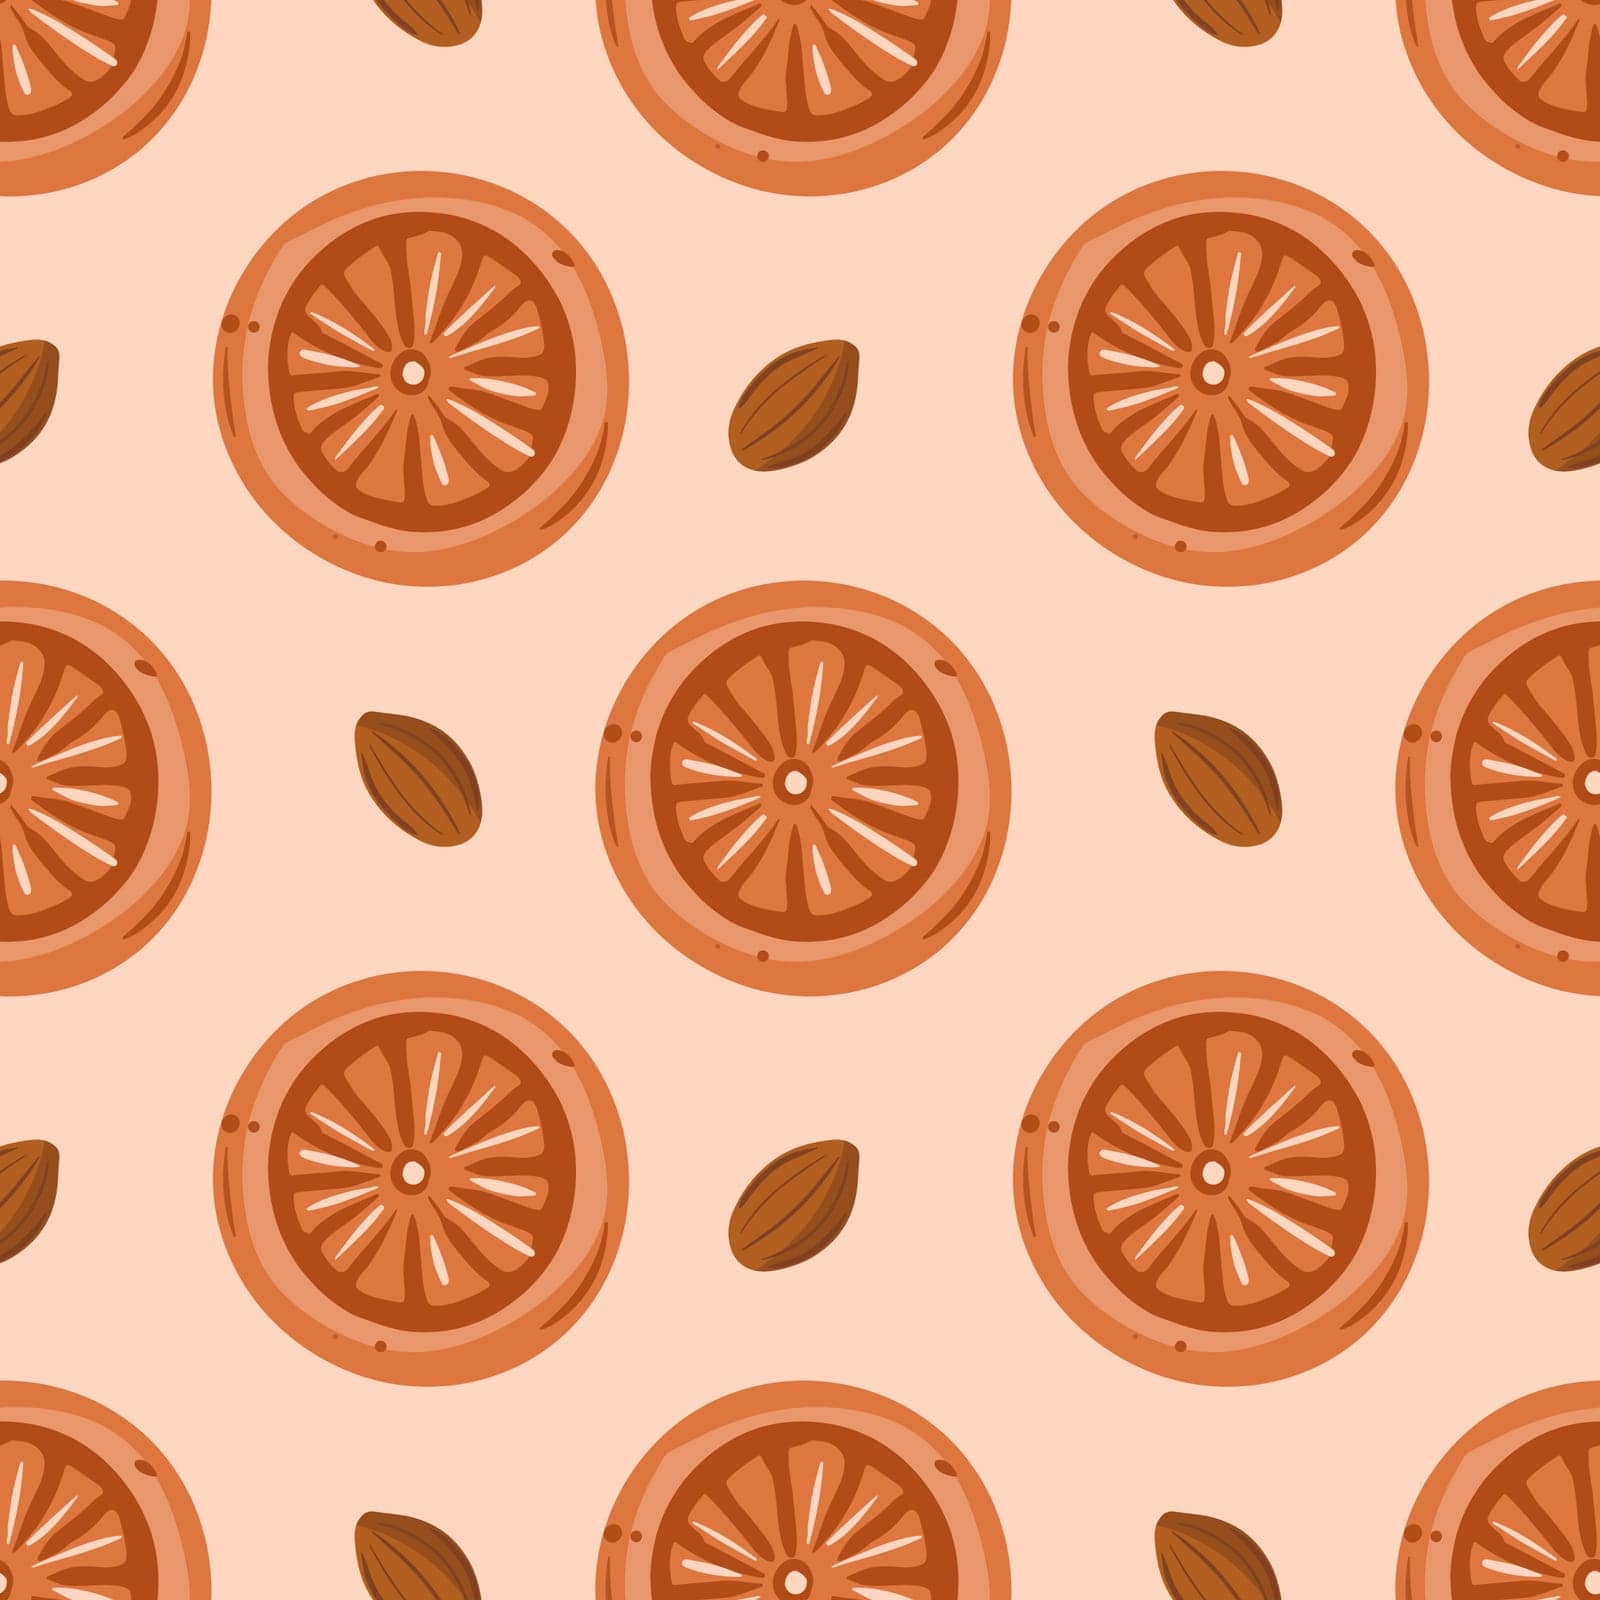 Seamless pattern with sweets. The cookie pattern by paninaartpuls